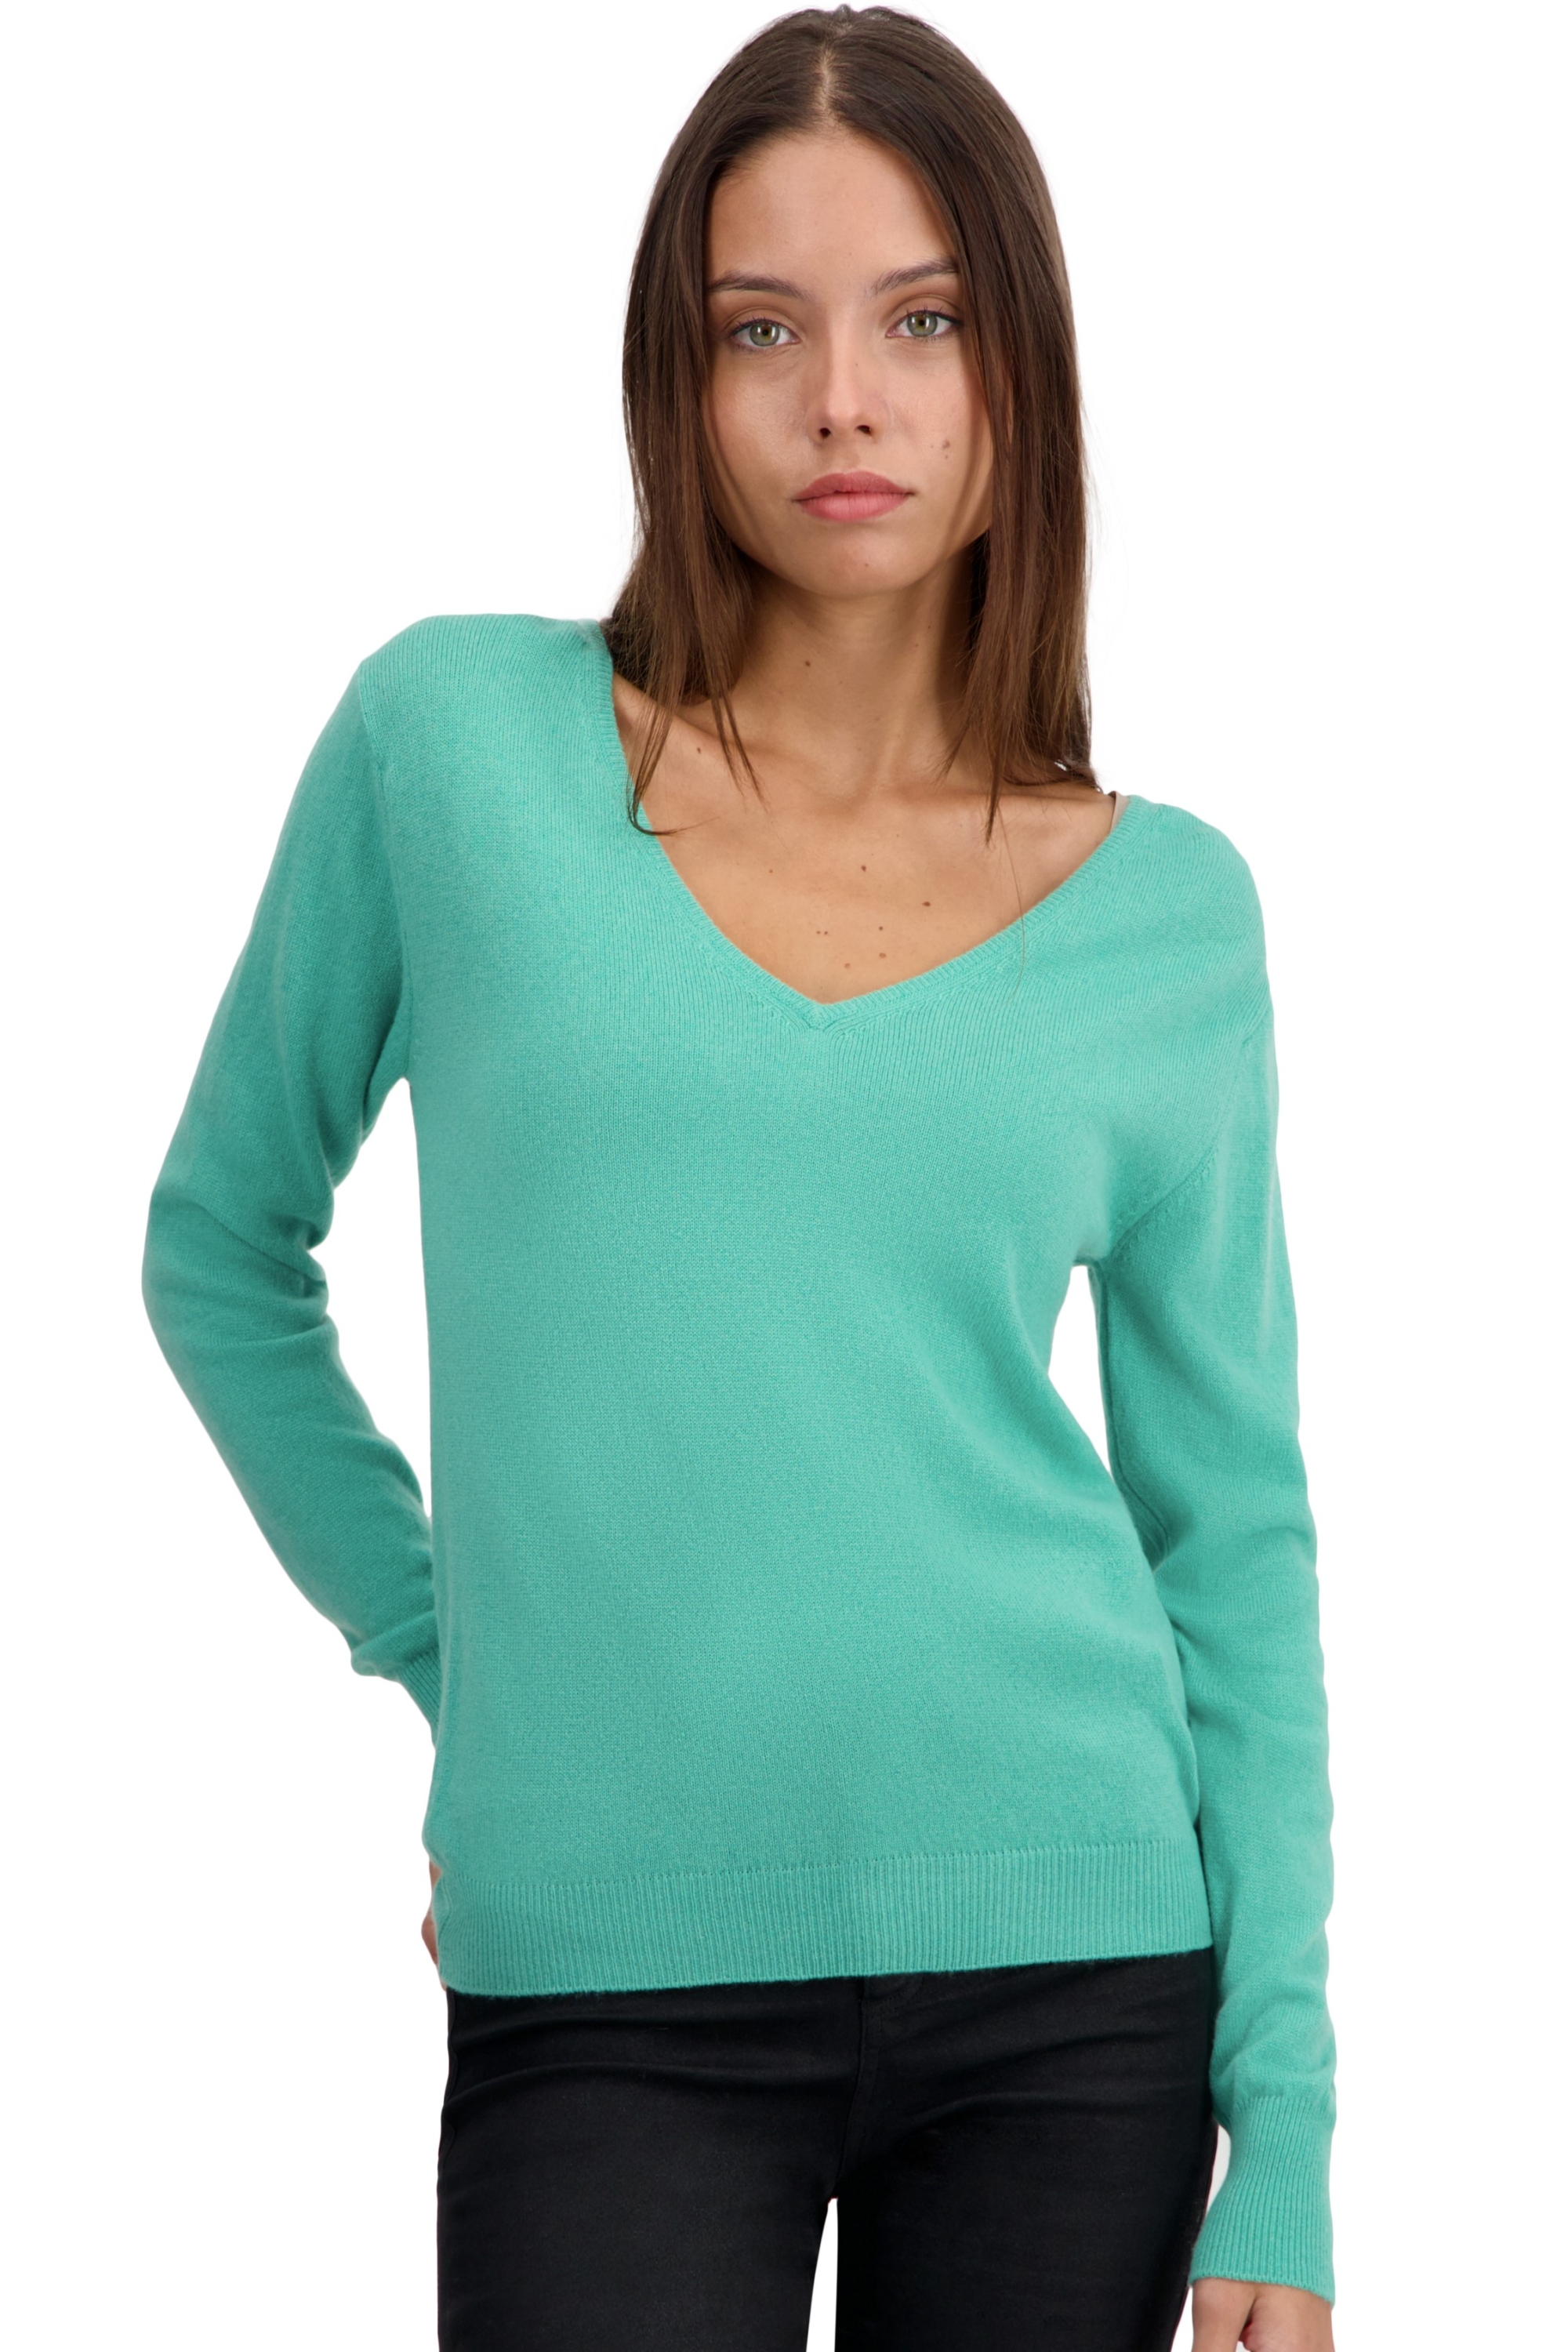 Cashmere ladies basic sweaters at low prices trieste first nile xl